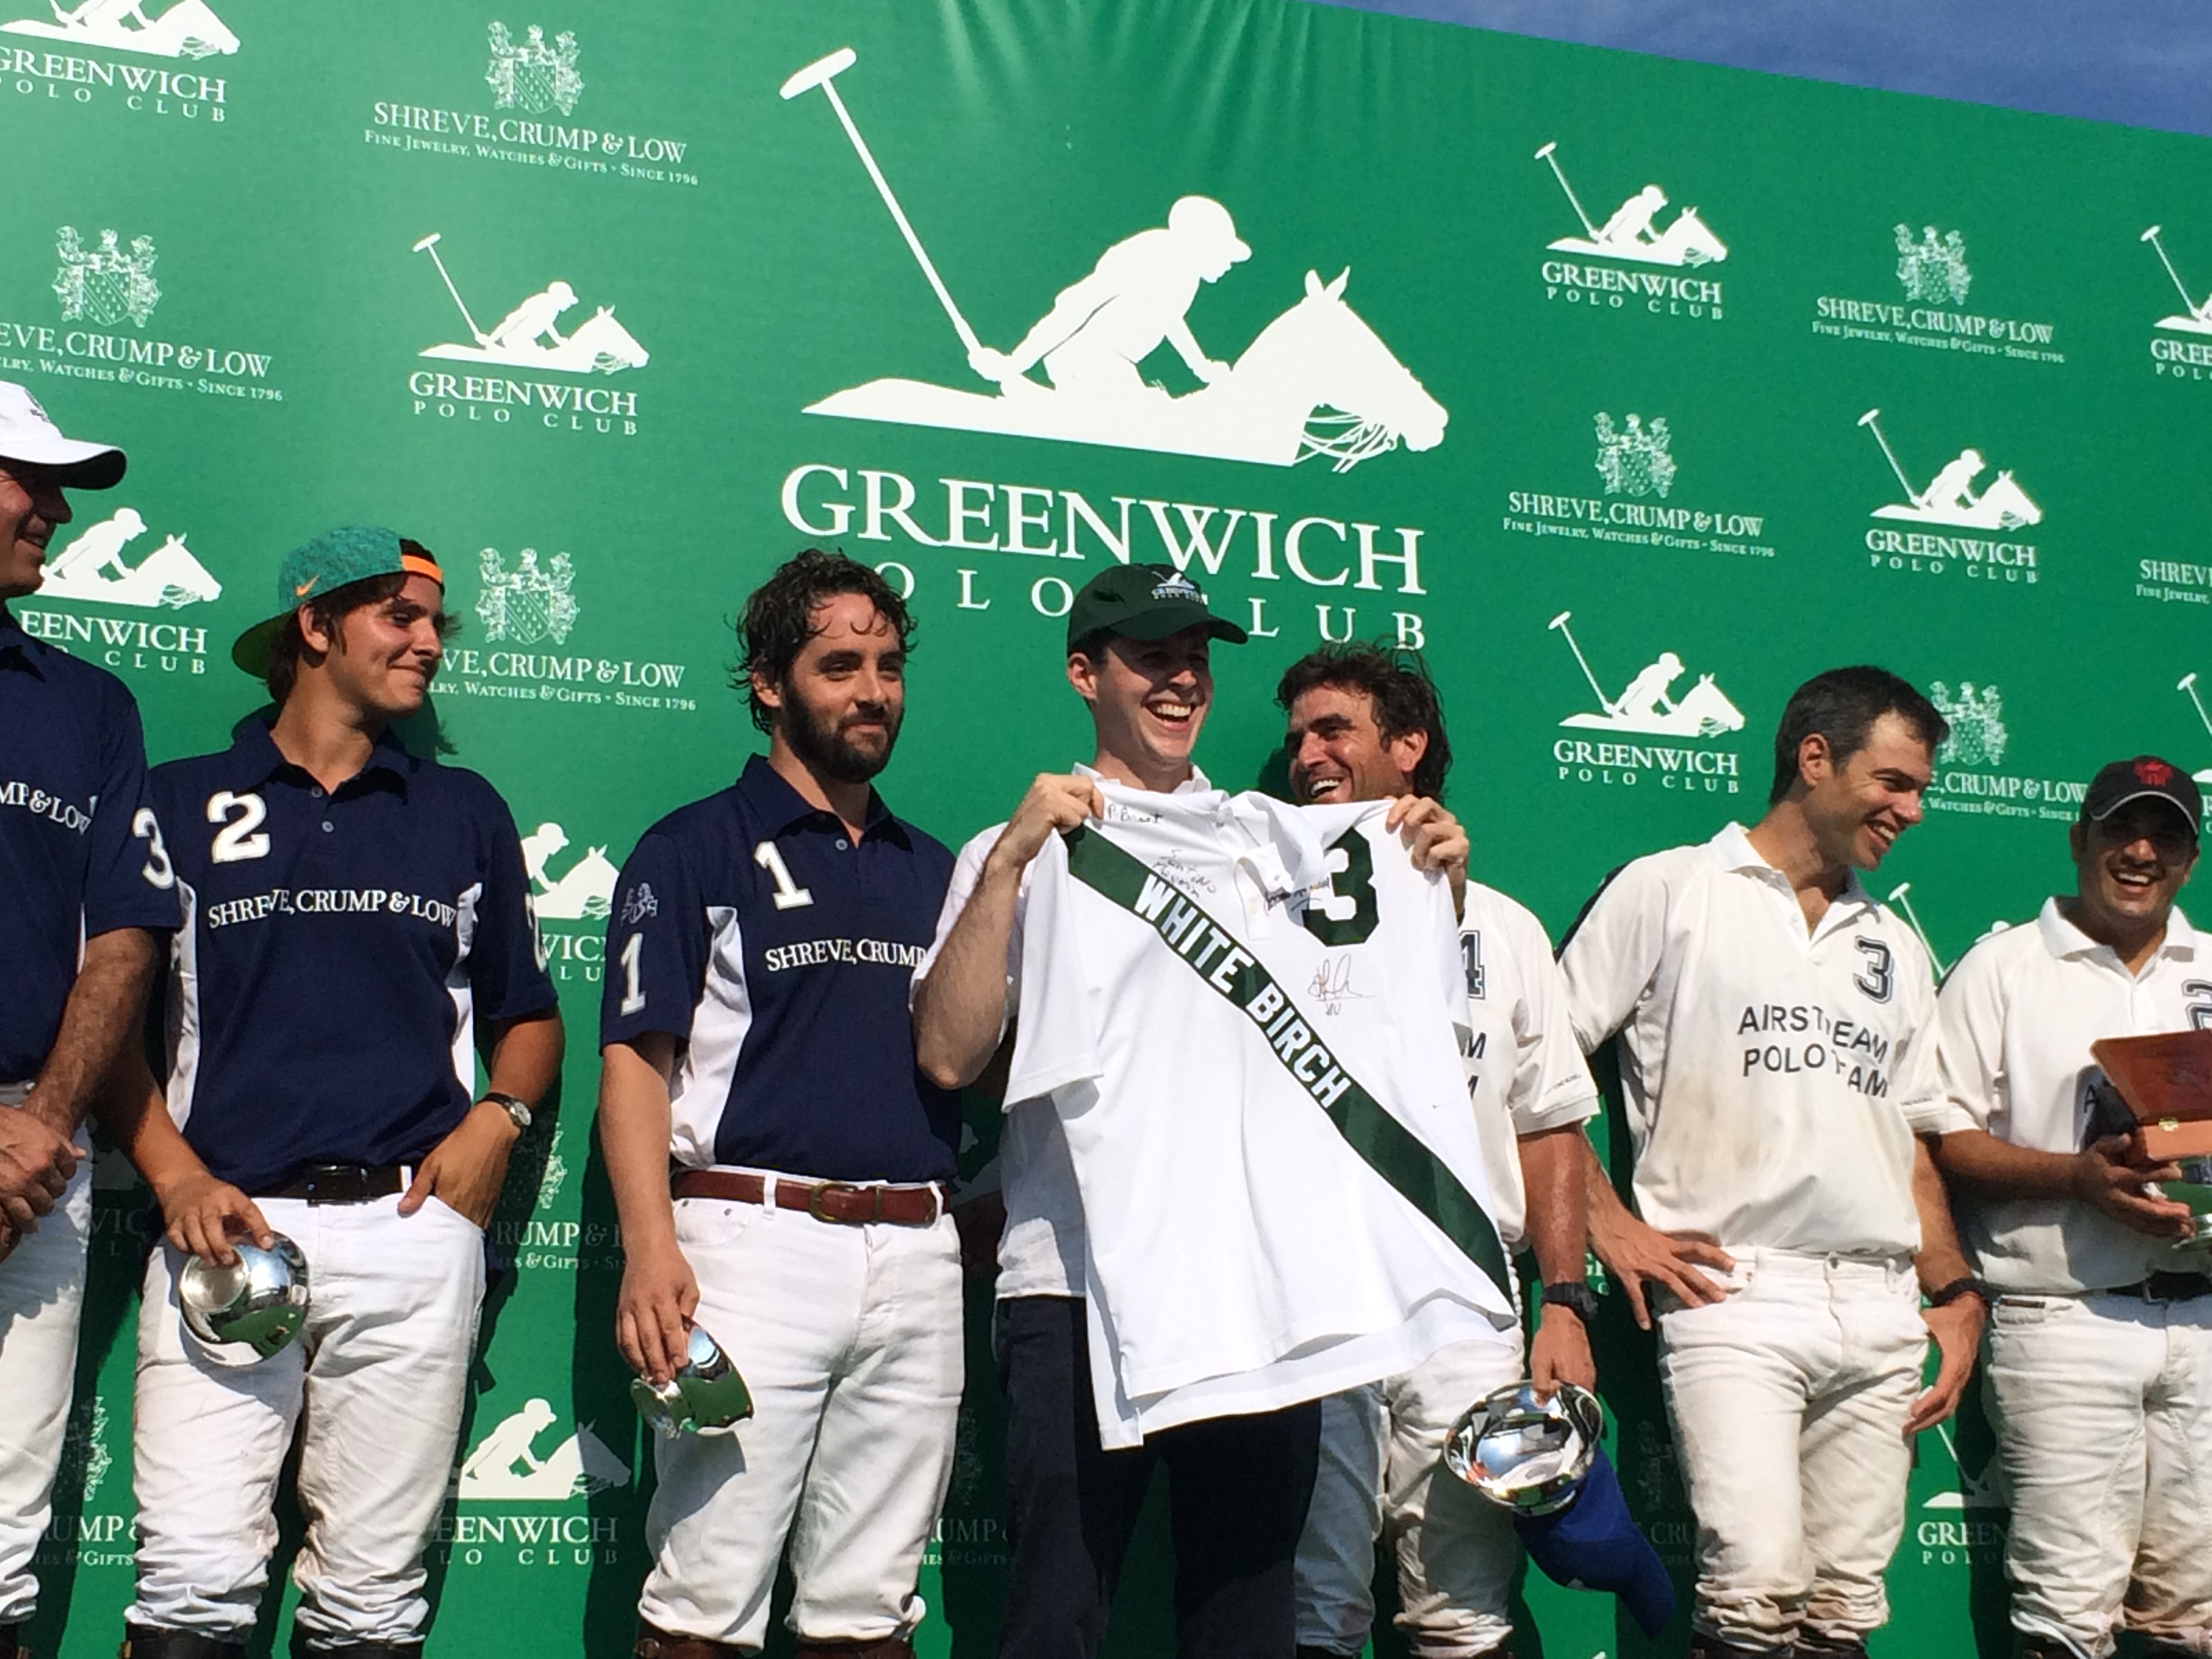 Polo Players of team Shreve, Crump & Low and team Airstream at Greenwich Polo Club